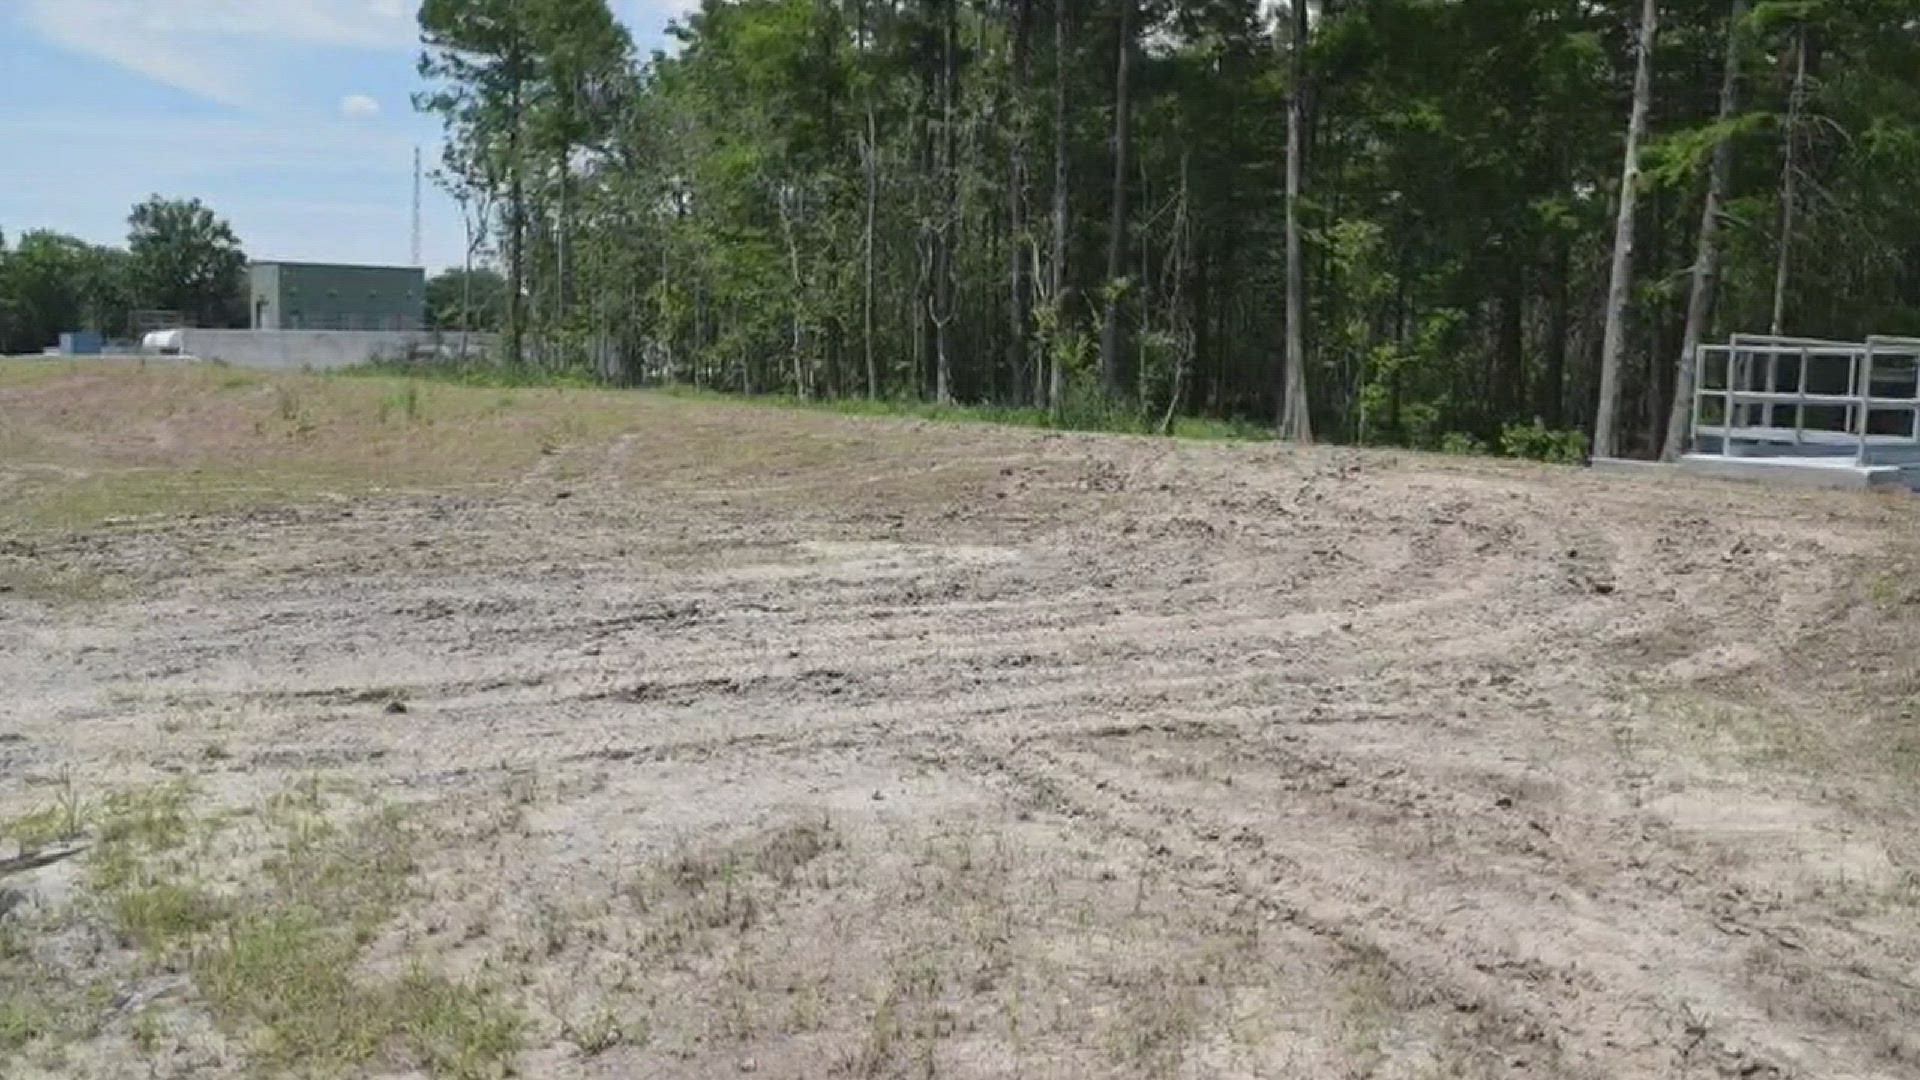 People riding ATV's on a levee near Luling are responsible for damage that could cause the levee to fail during an event like a hurricane, St. Charles Parish officials said.